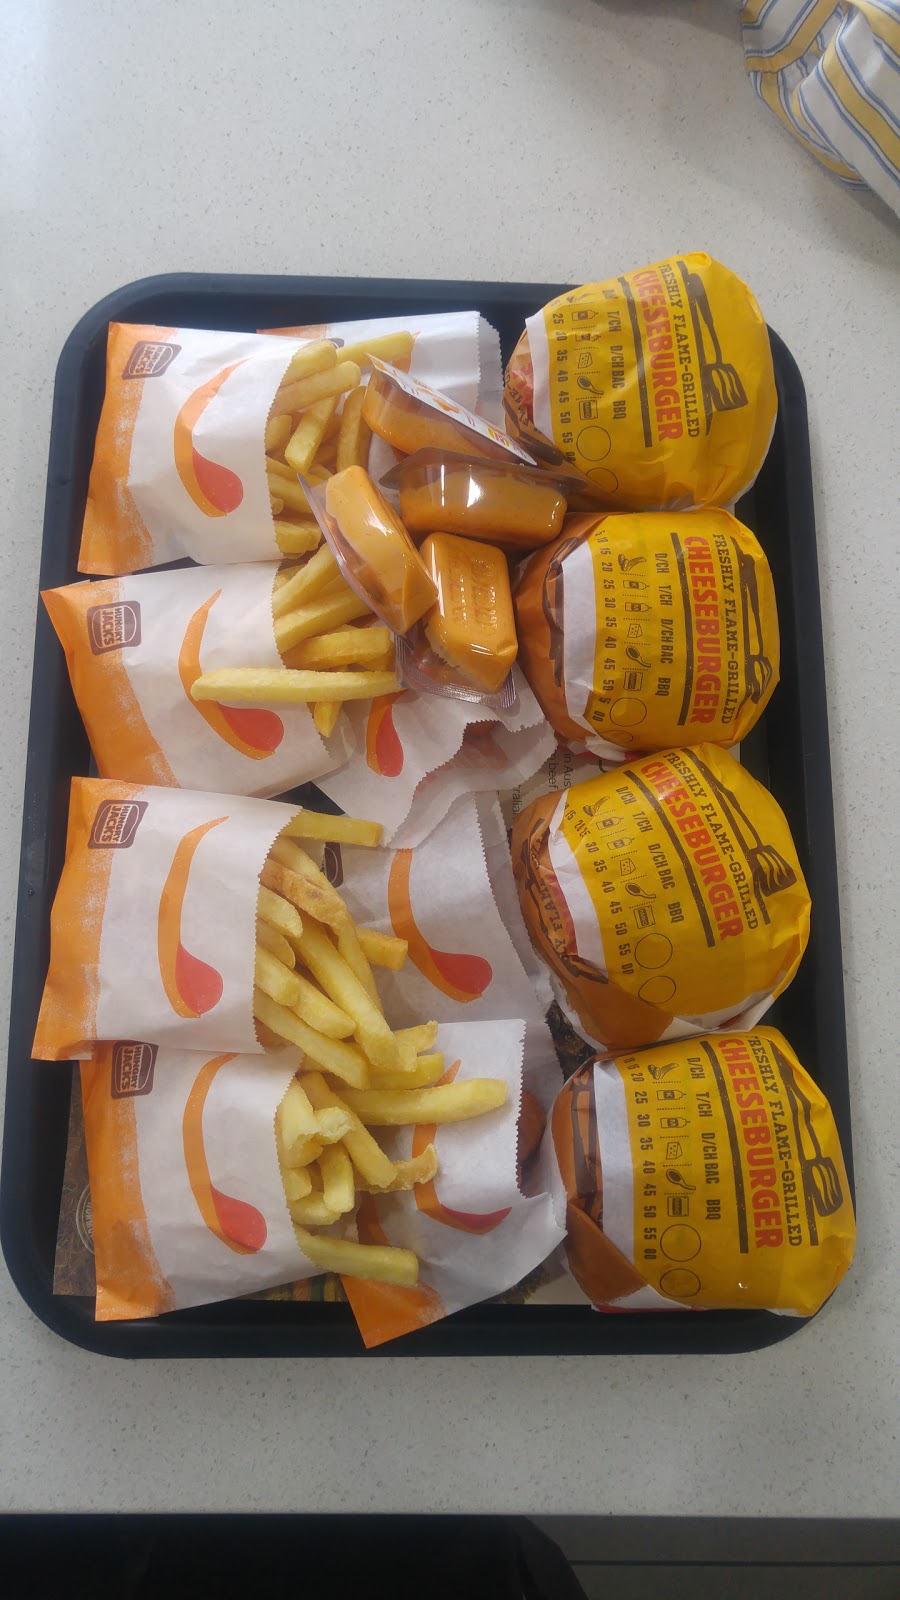 Hungry Jacks | 24-42 King Georges Rd, Wiley Park NSW 2195, Australia | Phone: (02) 9758 9454